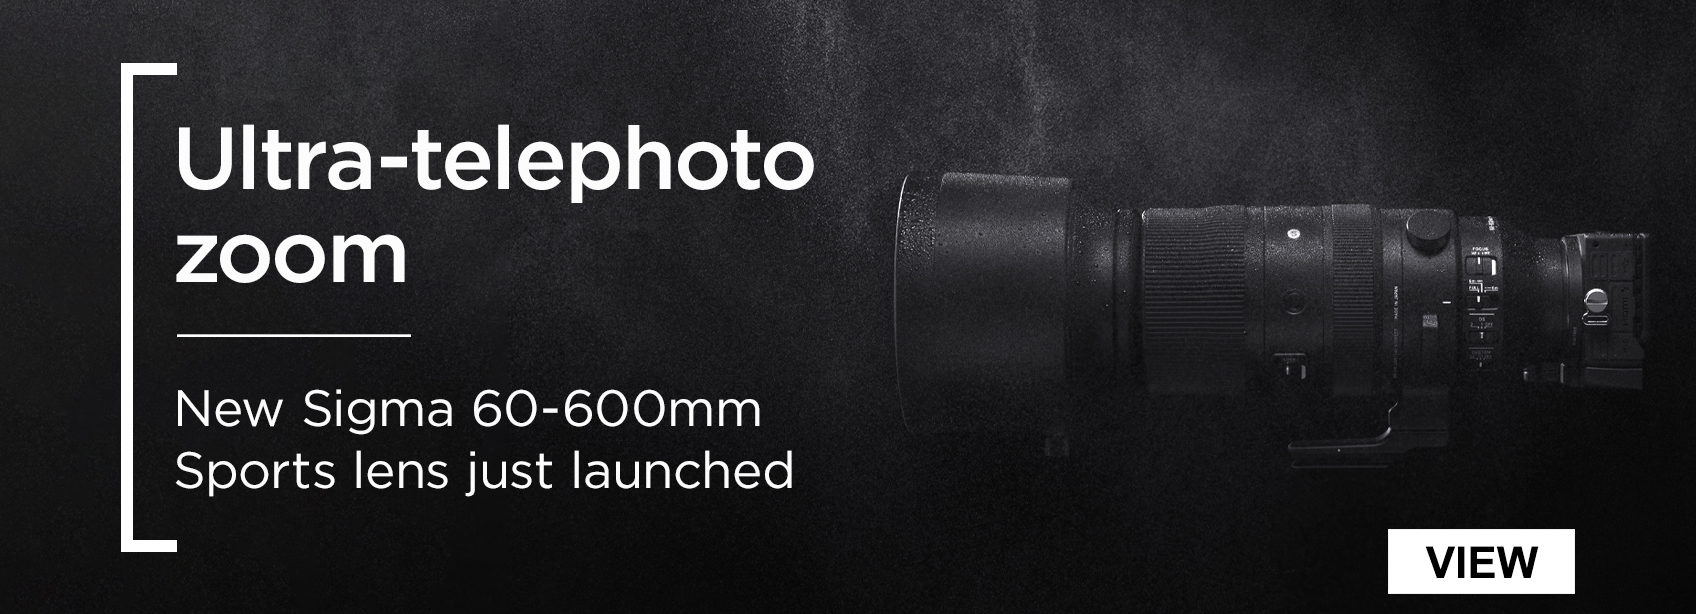 Ultra-telephoto zoom - New Sigma 60-600mm Sports lens just launched